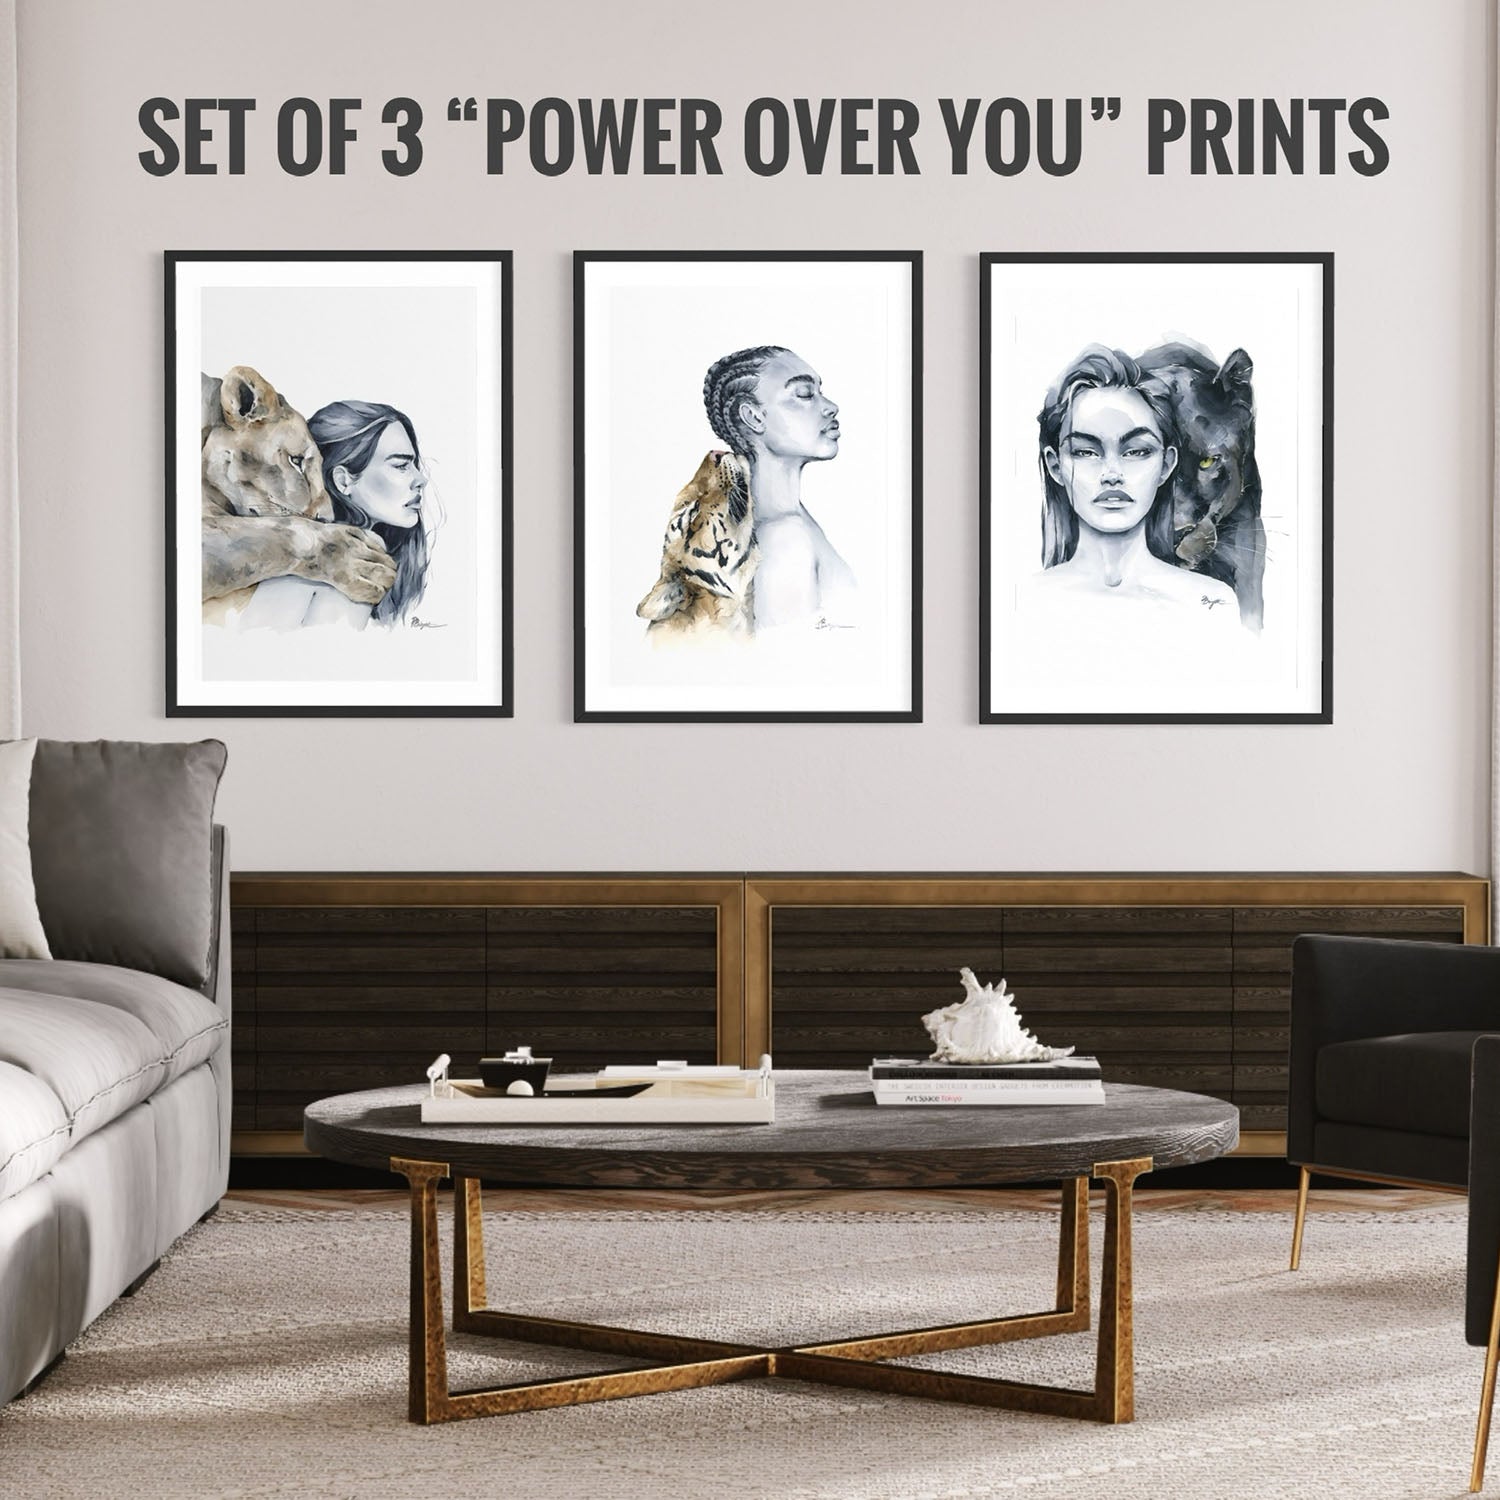 set of 3 prints from Power over you collection by Polina Bright